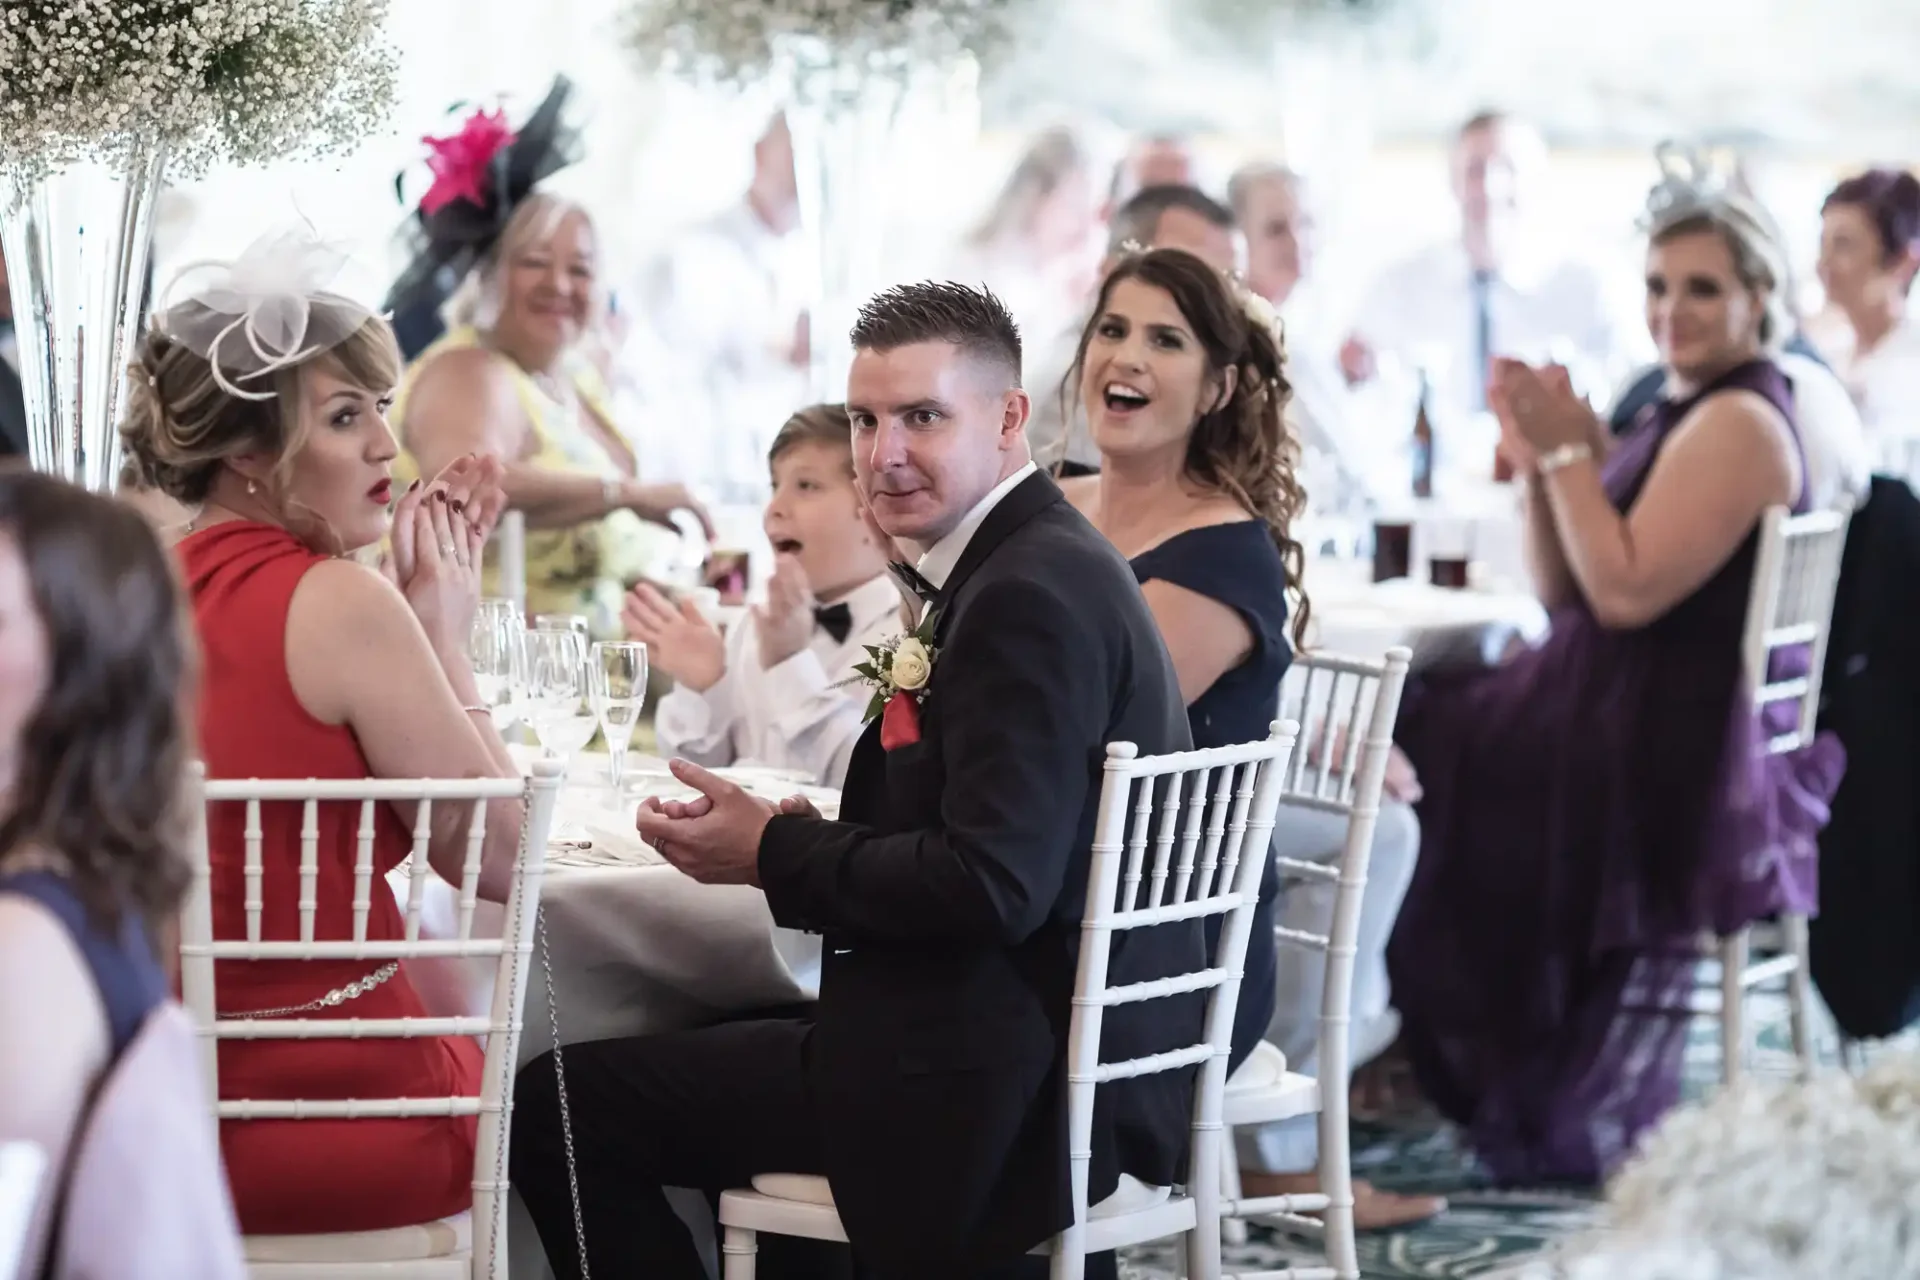 A wedding reception scene with guests in formal attire, focusing on a man in a suit and woman in a fascinator, both seated and clapping.